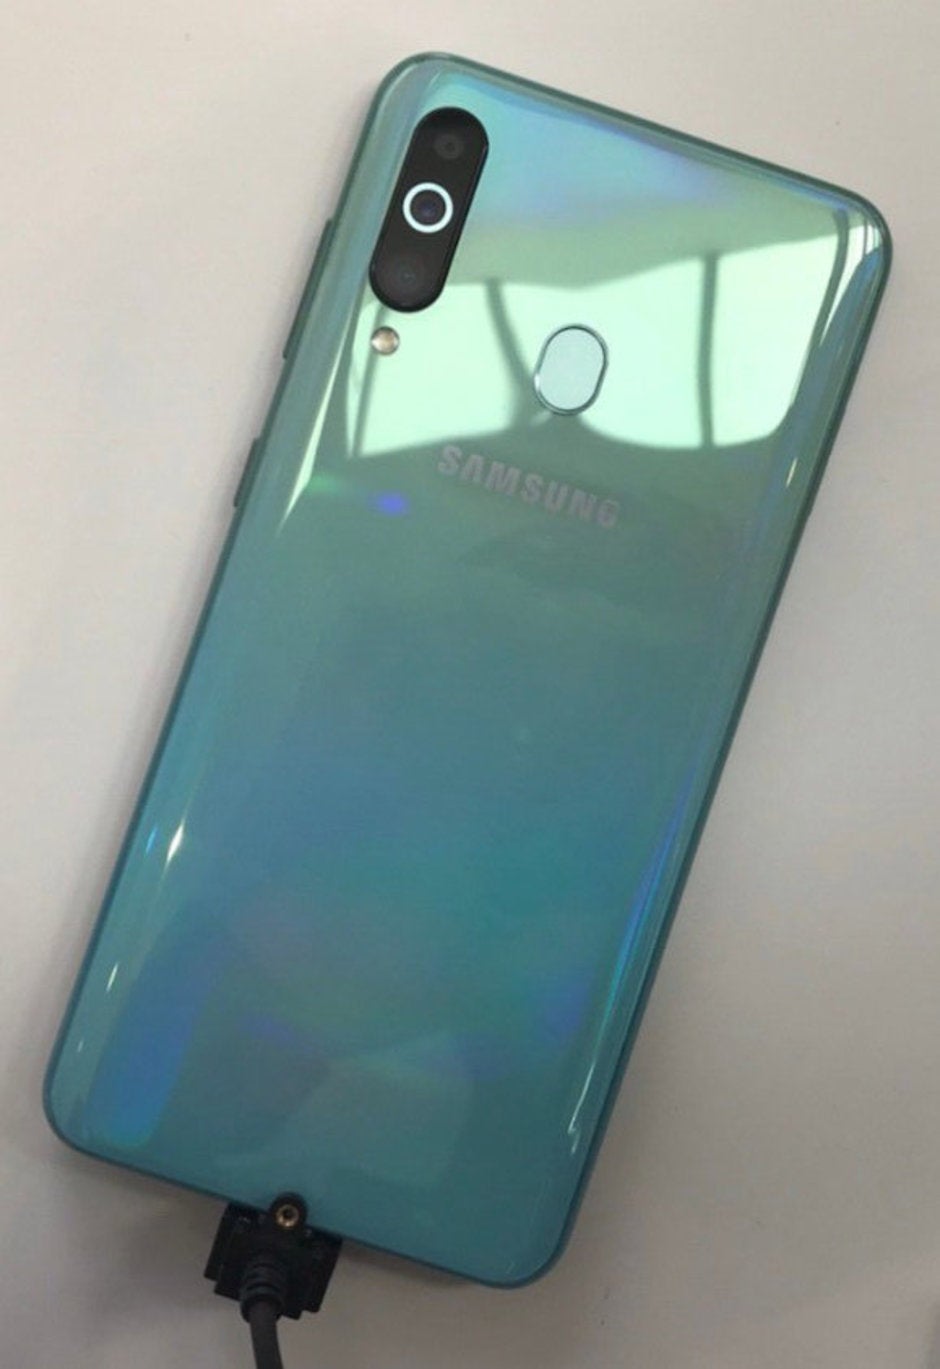 Samsung Galaxy A60 - Samsung unveils Galaxy A60 and A40s mid-rangers: punch-hole display, triple camera